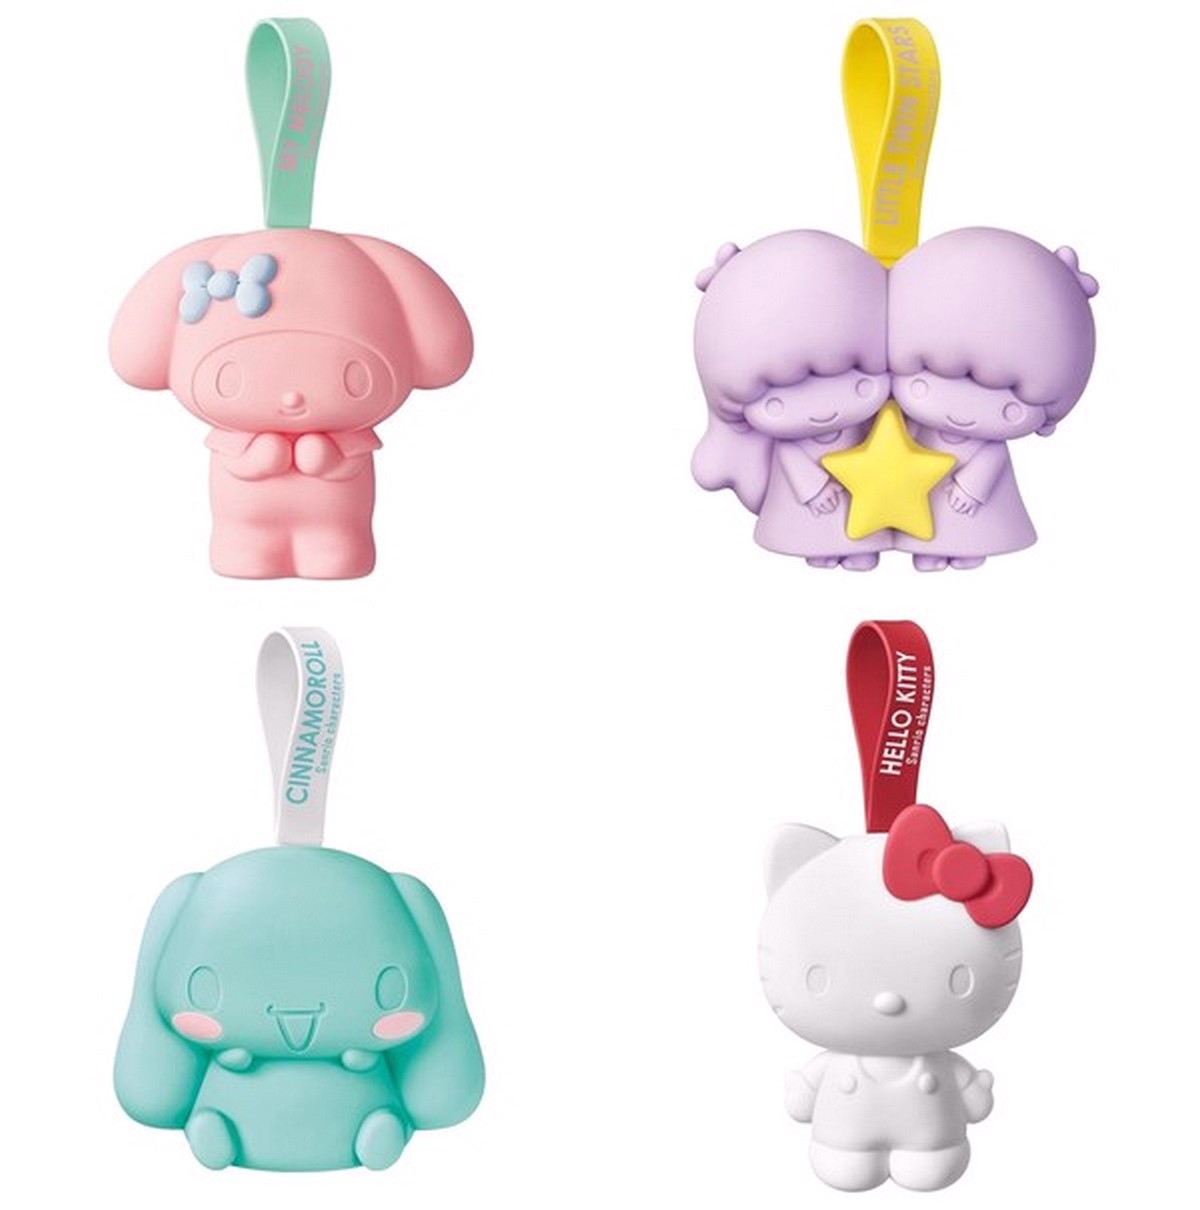 7-Eleven-Singapore-teams-up-with-8-popular-Sanrio-characters-to-launch-a-Mini-Pouch-Collectible-Programme-Little-Baubles-of-Joyb01 9 Jun-10 Aug 2021: Redeem & Collect All 8 Famous Sanrio Characters Silicone Mini Pouches at 7 Eleven Singapore Islandwide! Featuring Hello Kitty, My Melody & More!